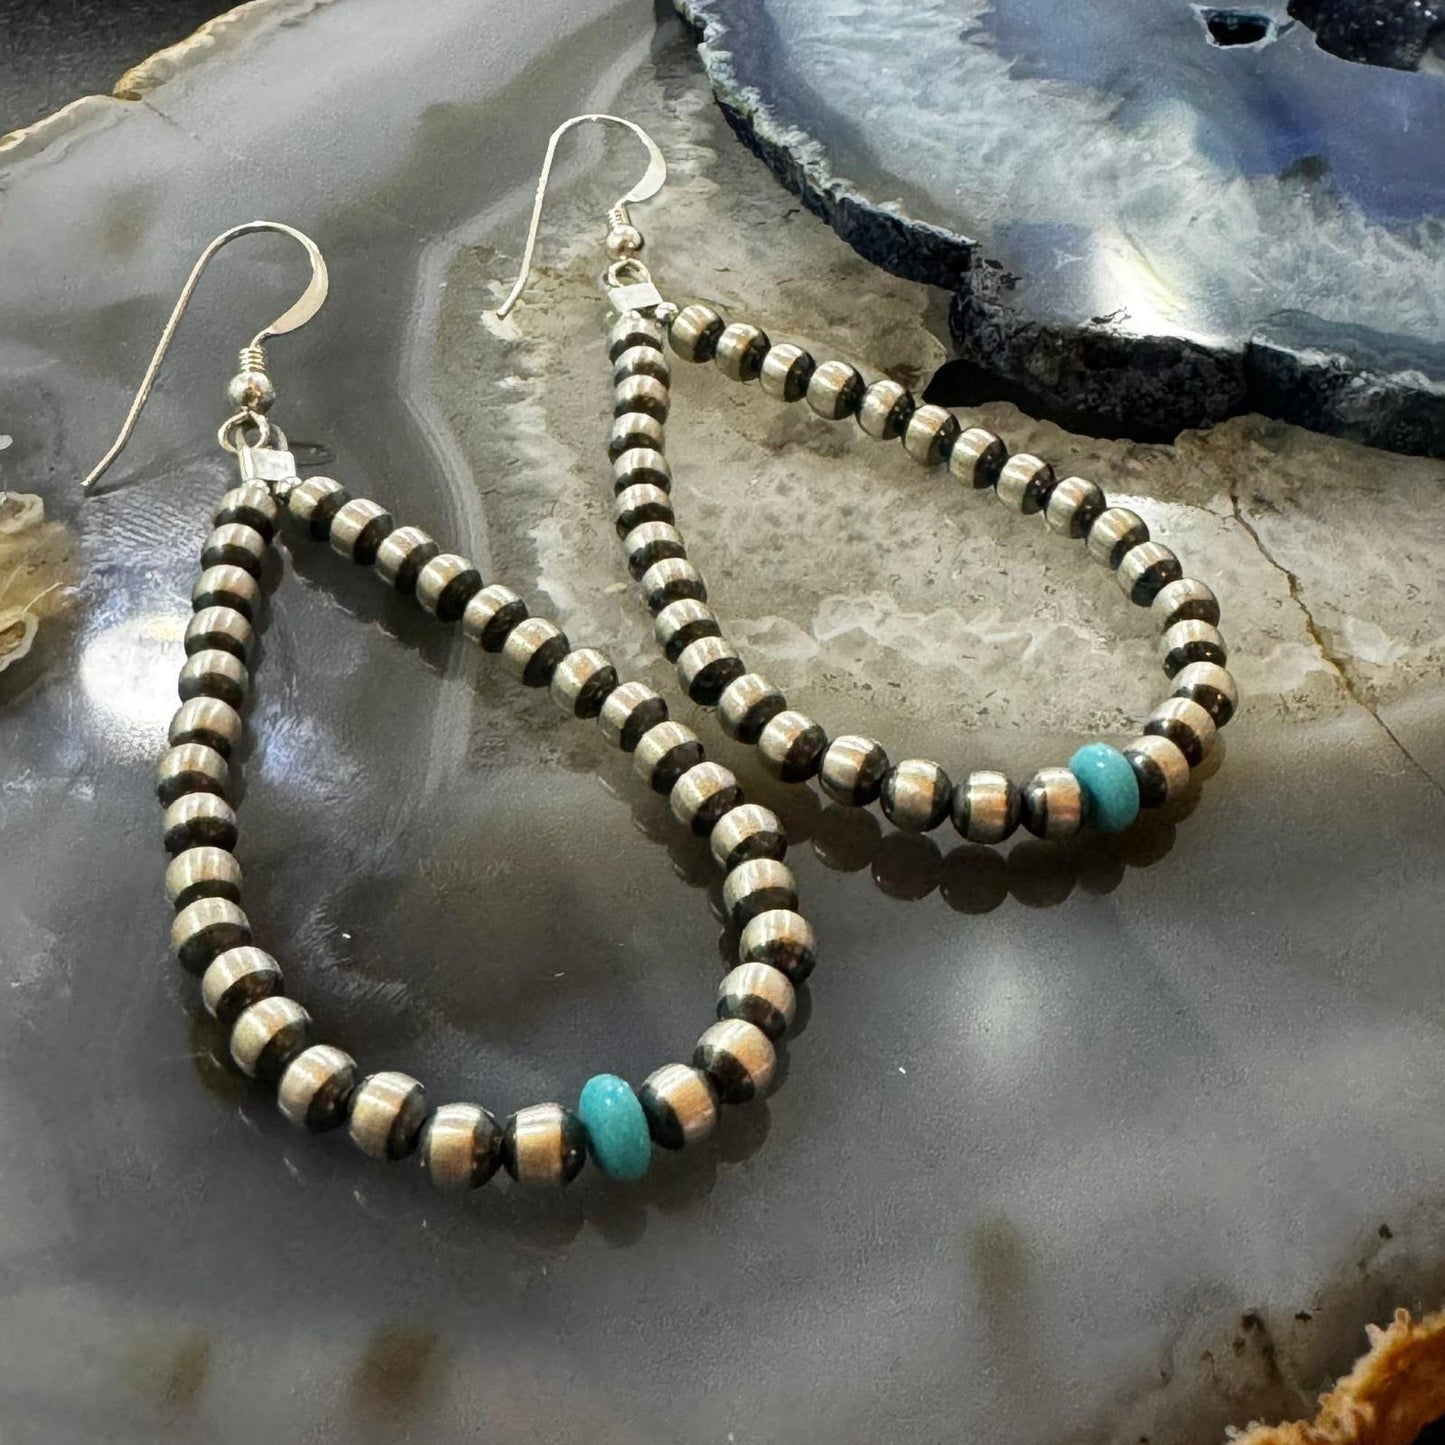 Navajo Pearl Beads 3mm & Turquoise Bead 5 mm Sterling Silver Dangle Earrings For Women